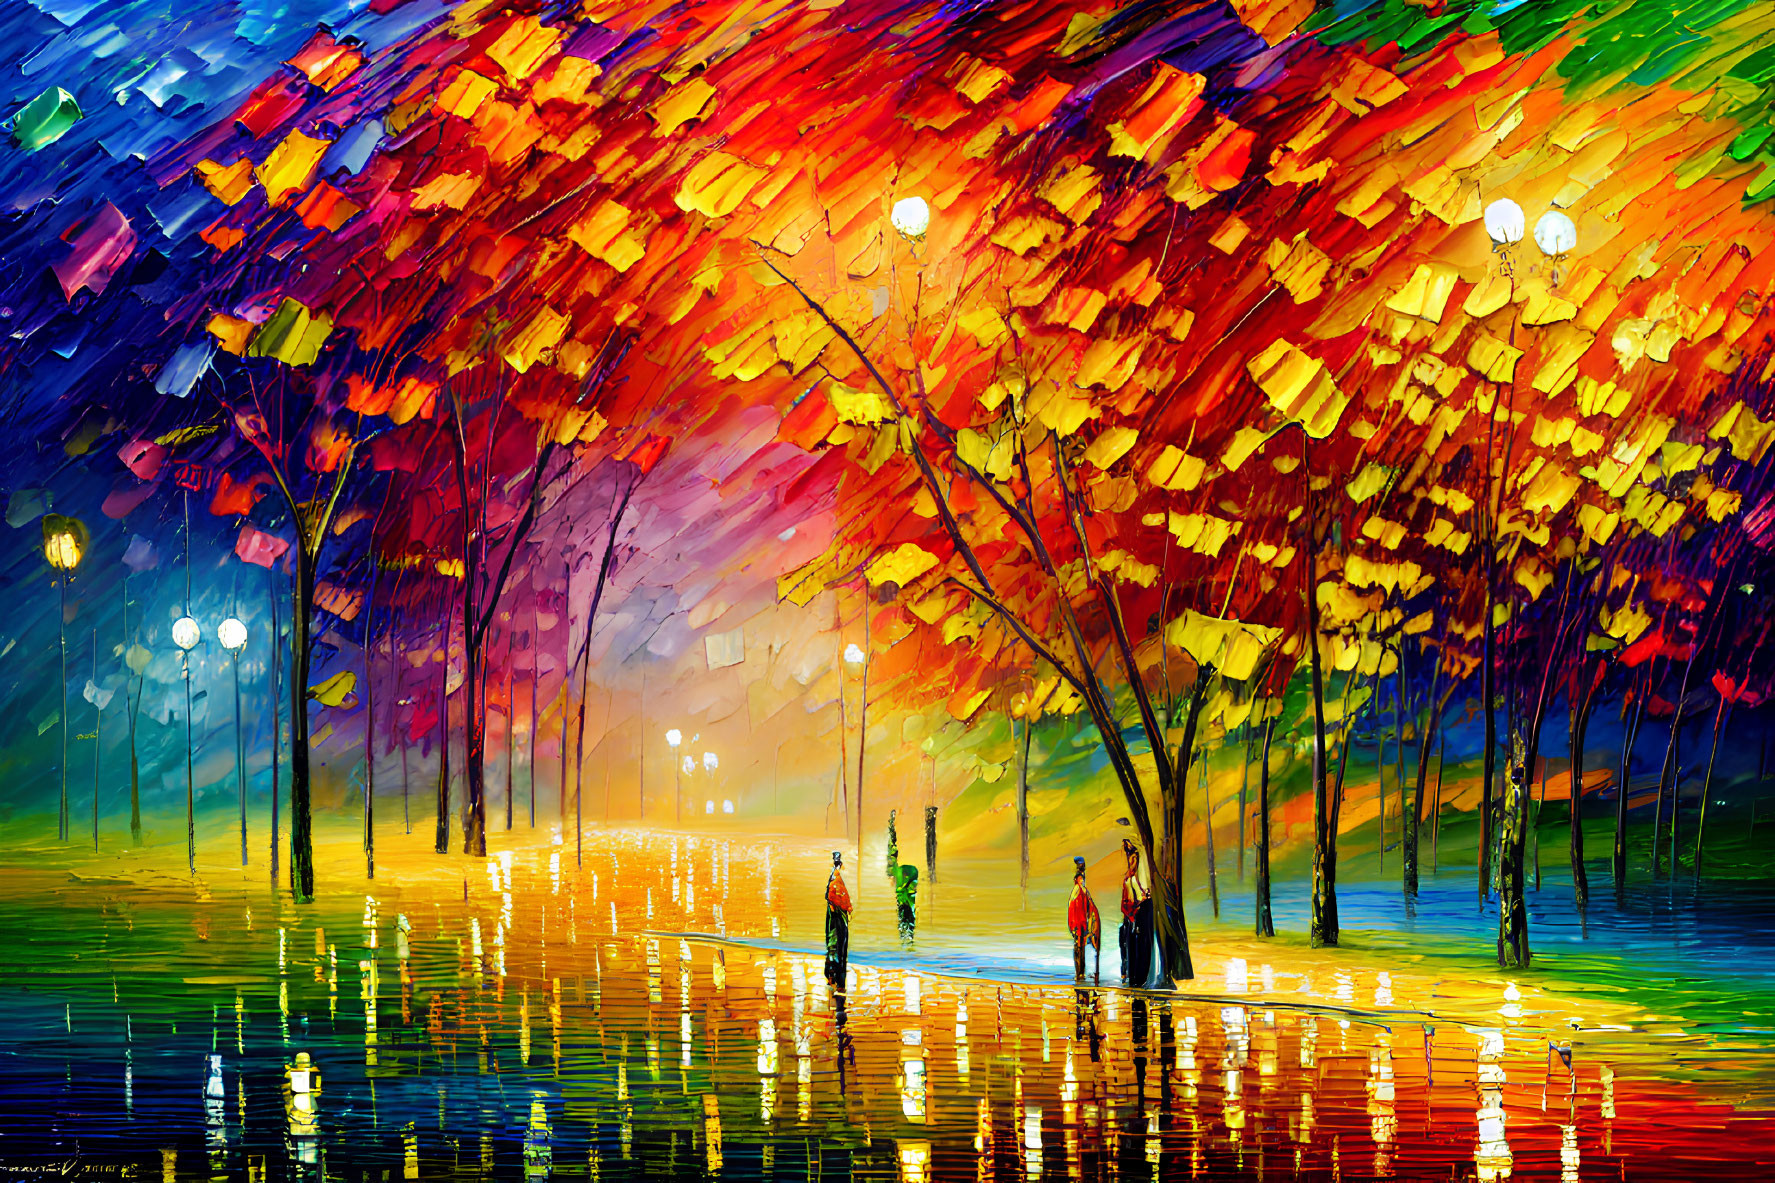 Colorful Rainy Tree-Lined Path Painting with People Strolling